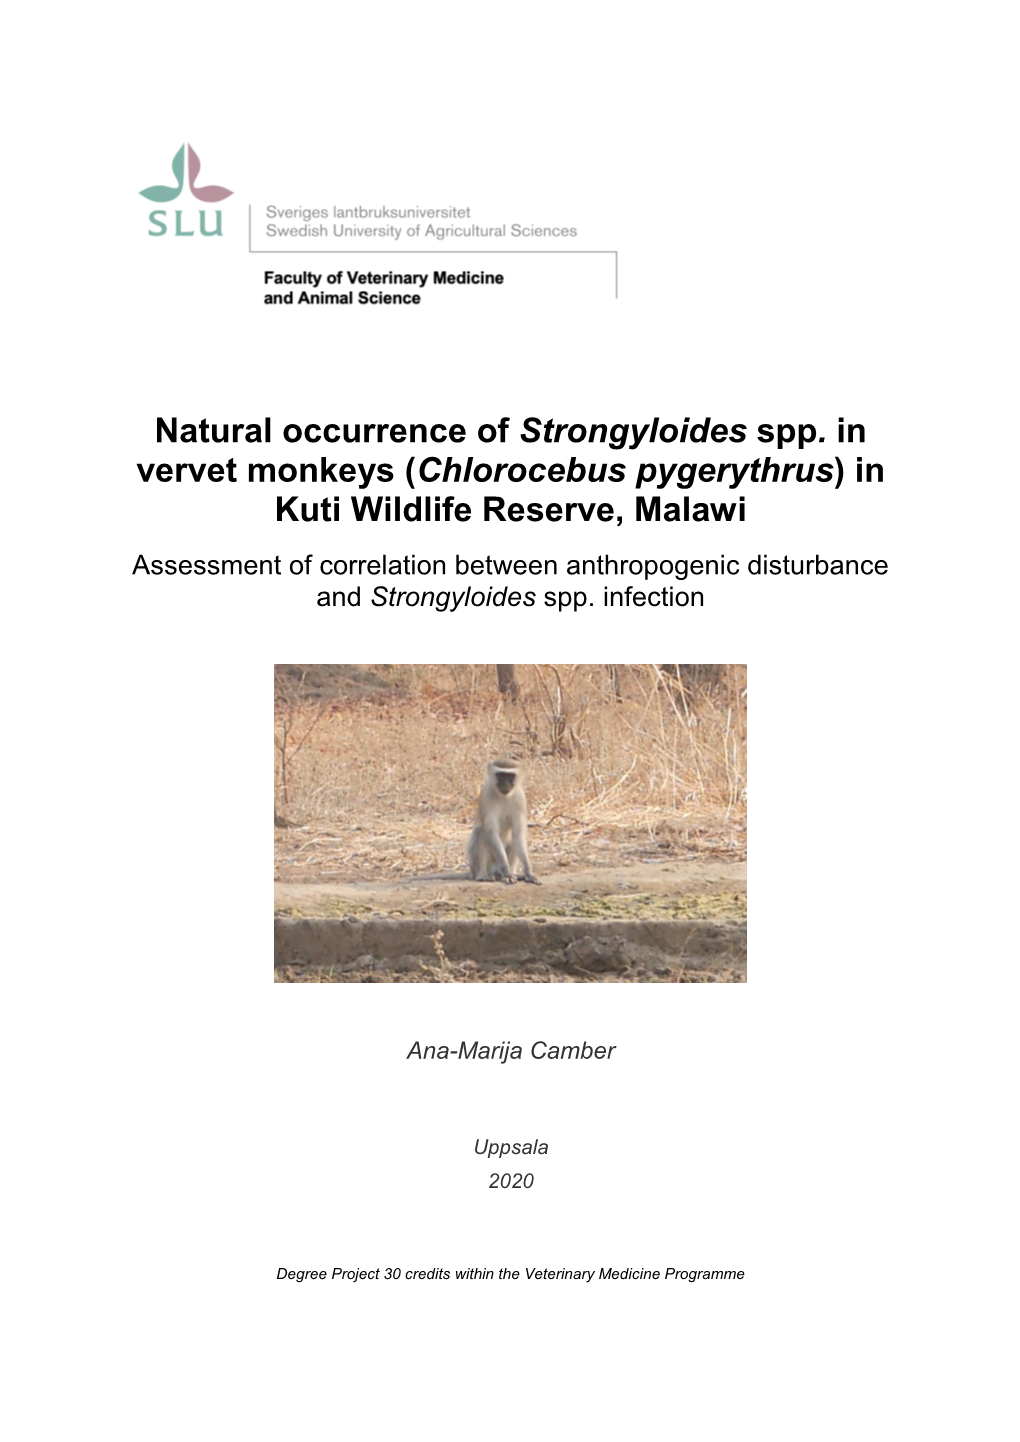 Natural Occurrence of Strongyloides Spp. in Vervet Monkeys